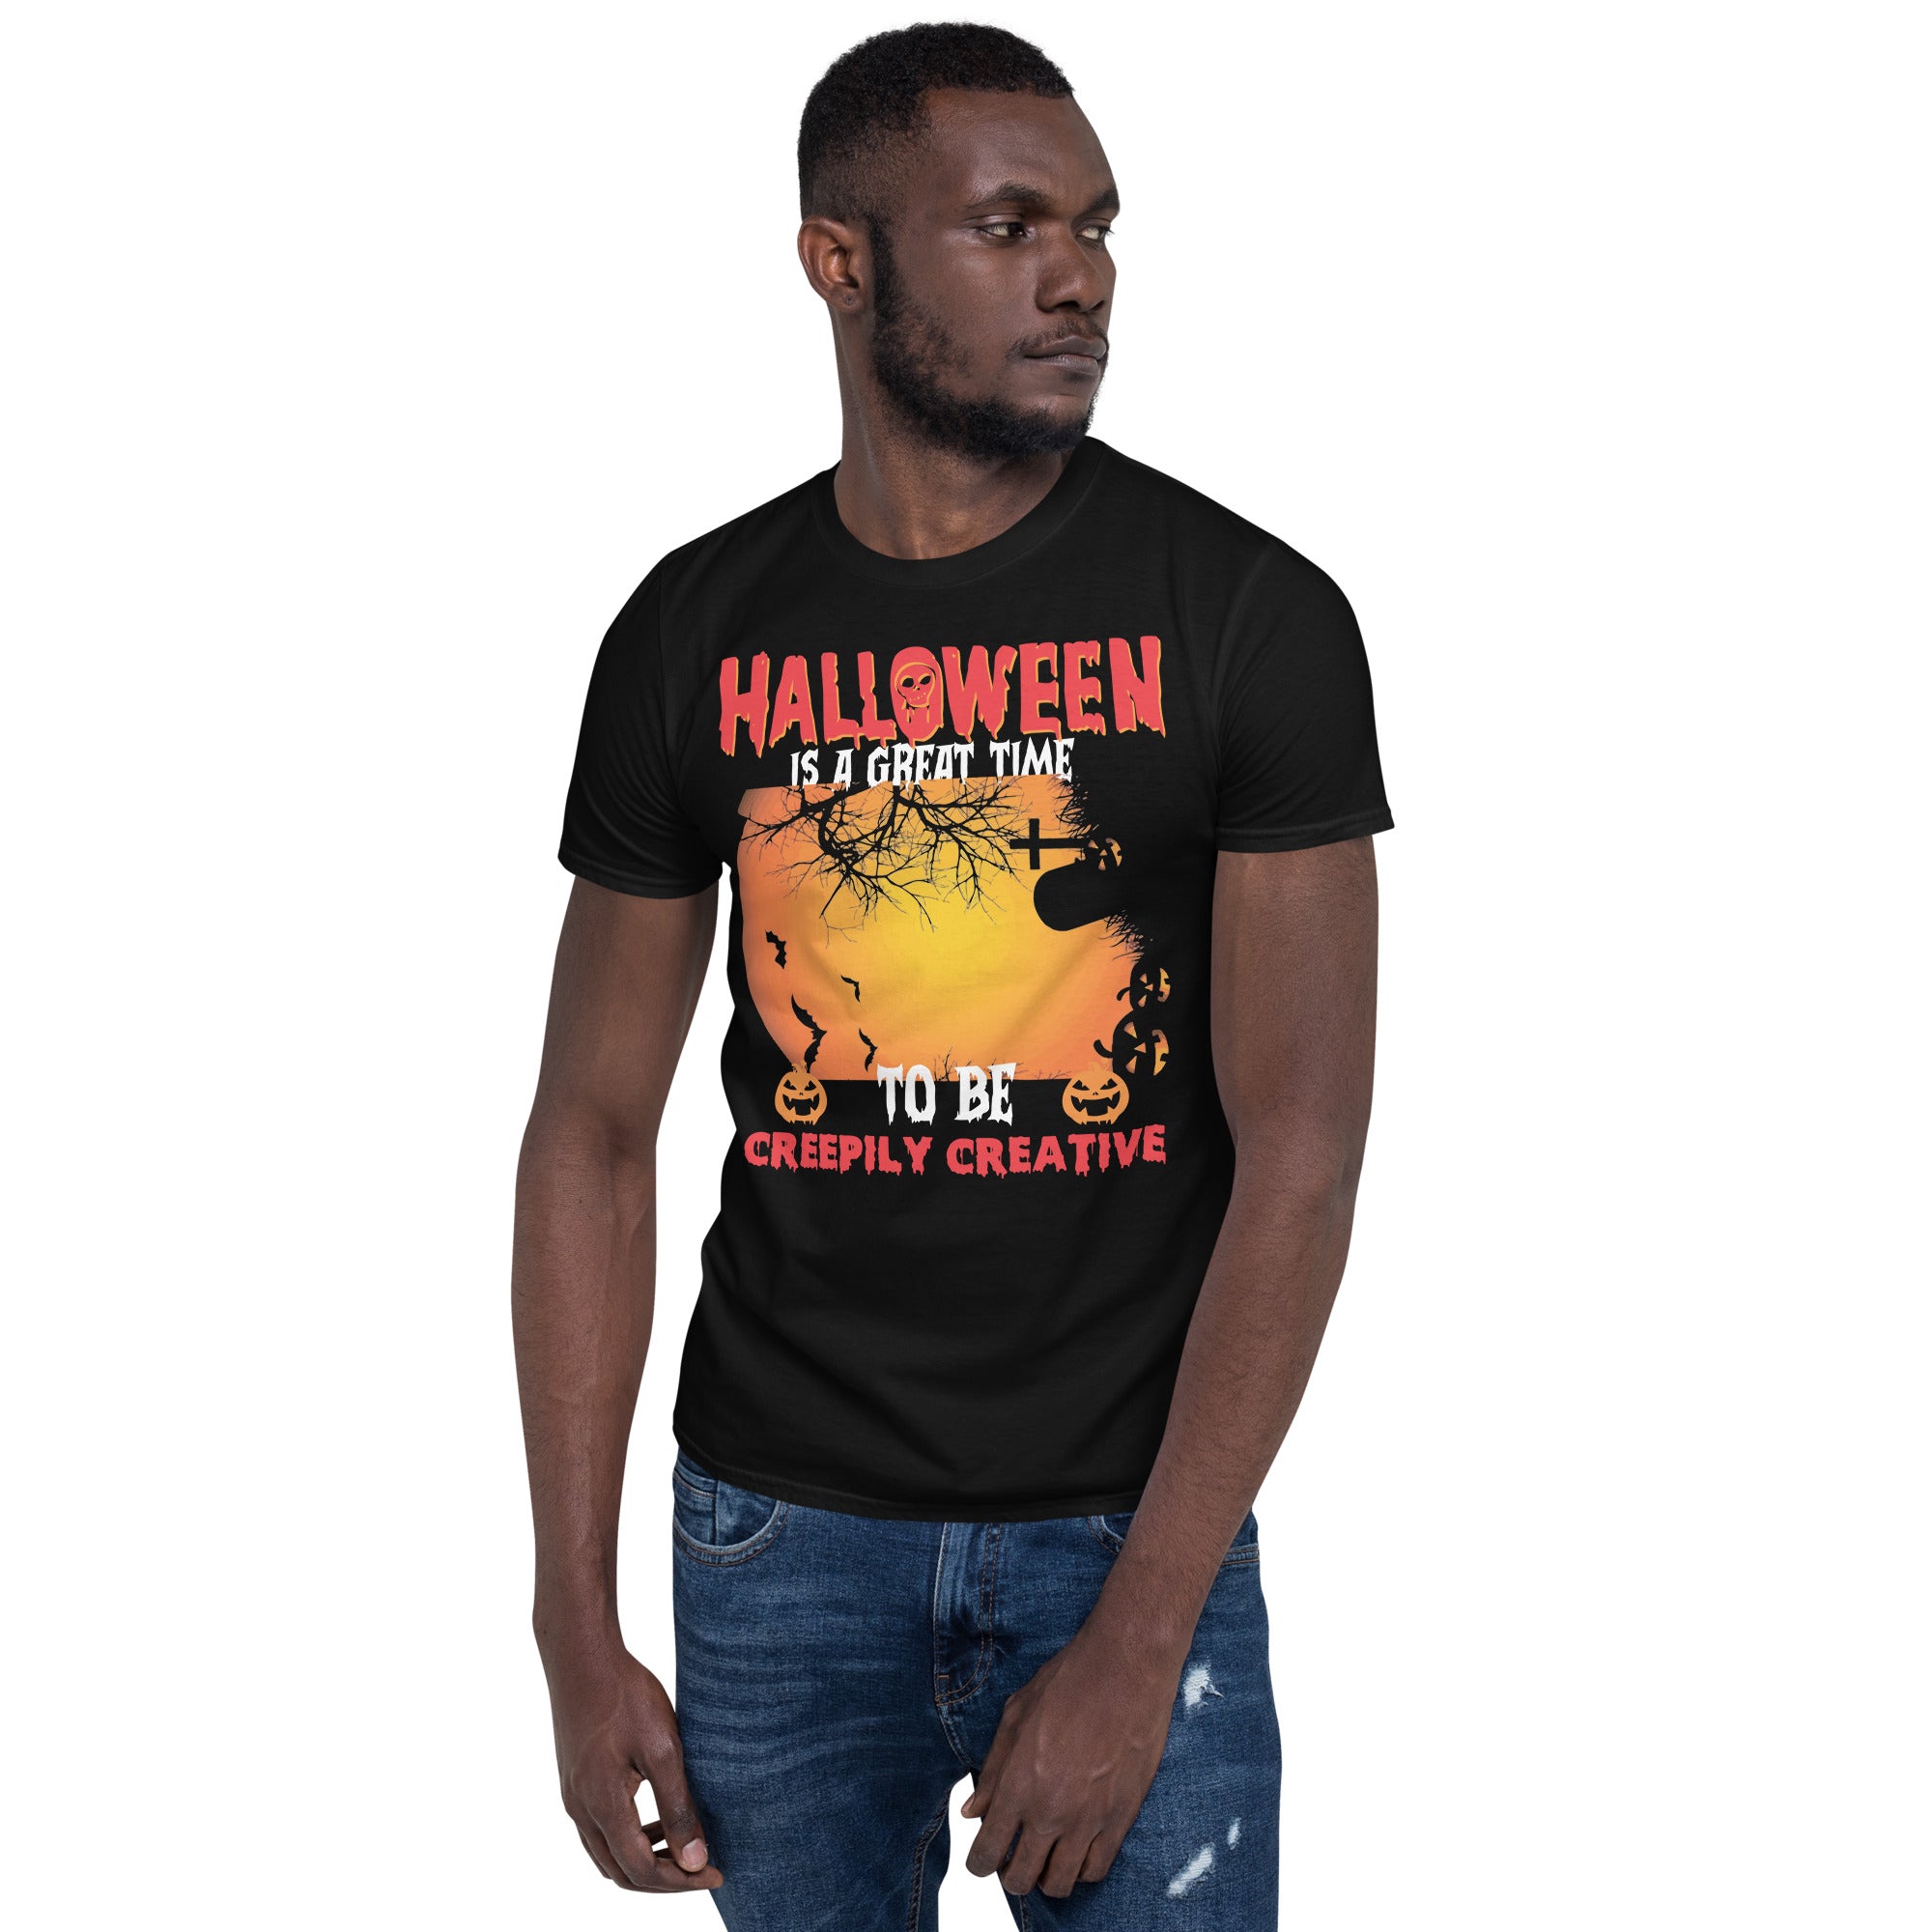 Halloween is A Great Time Short-Sleeve Unisex T-Shirt